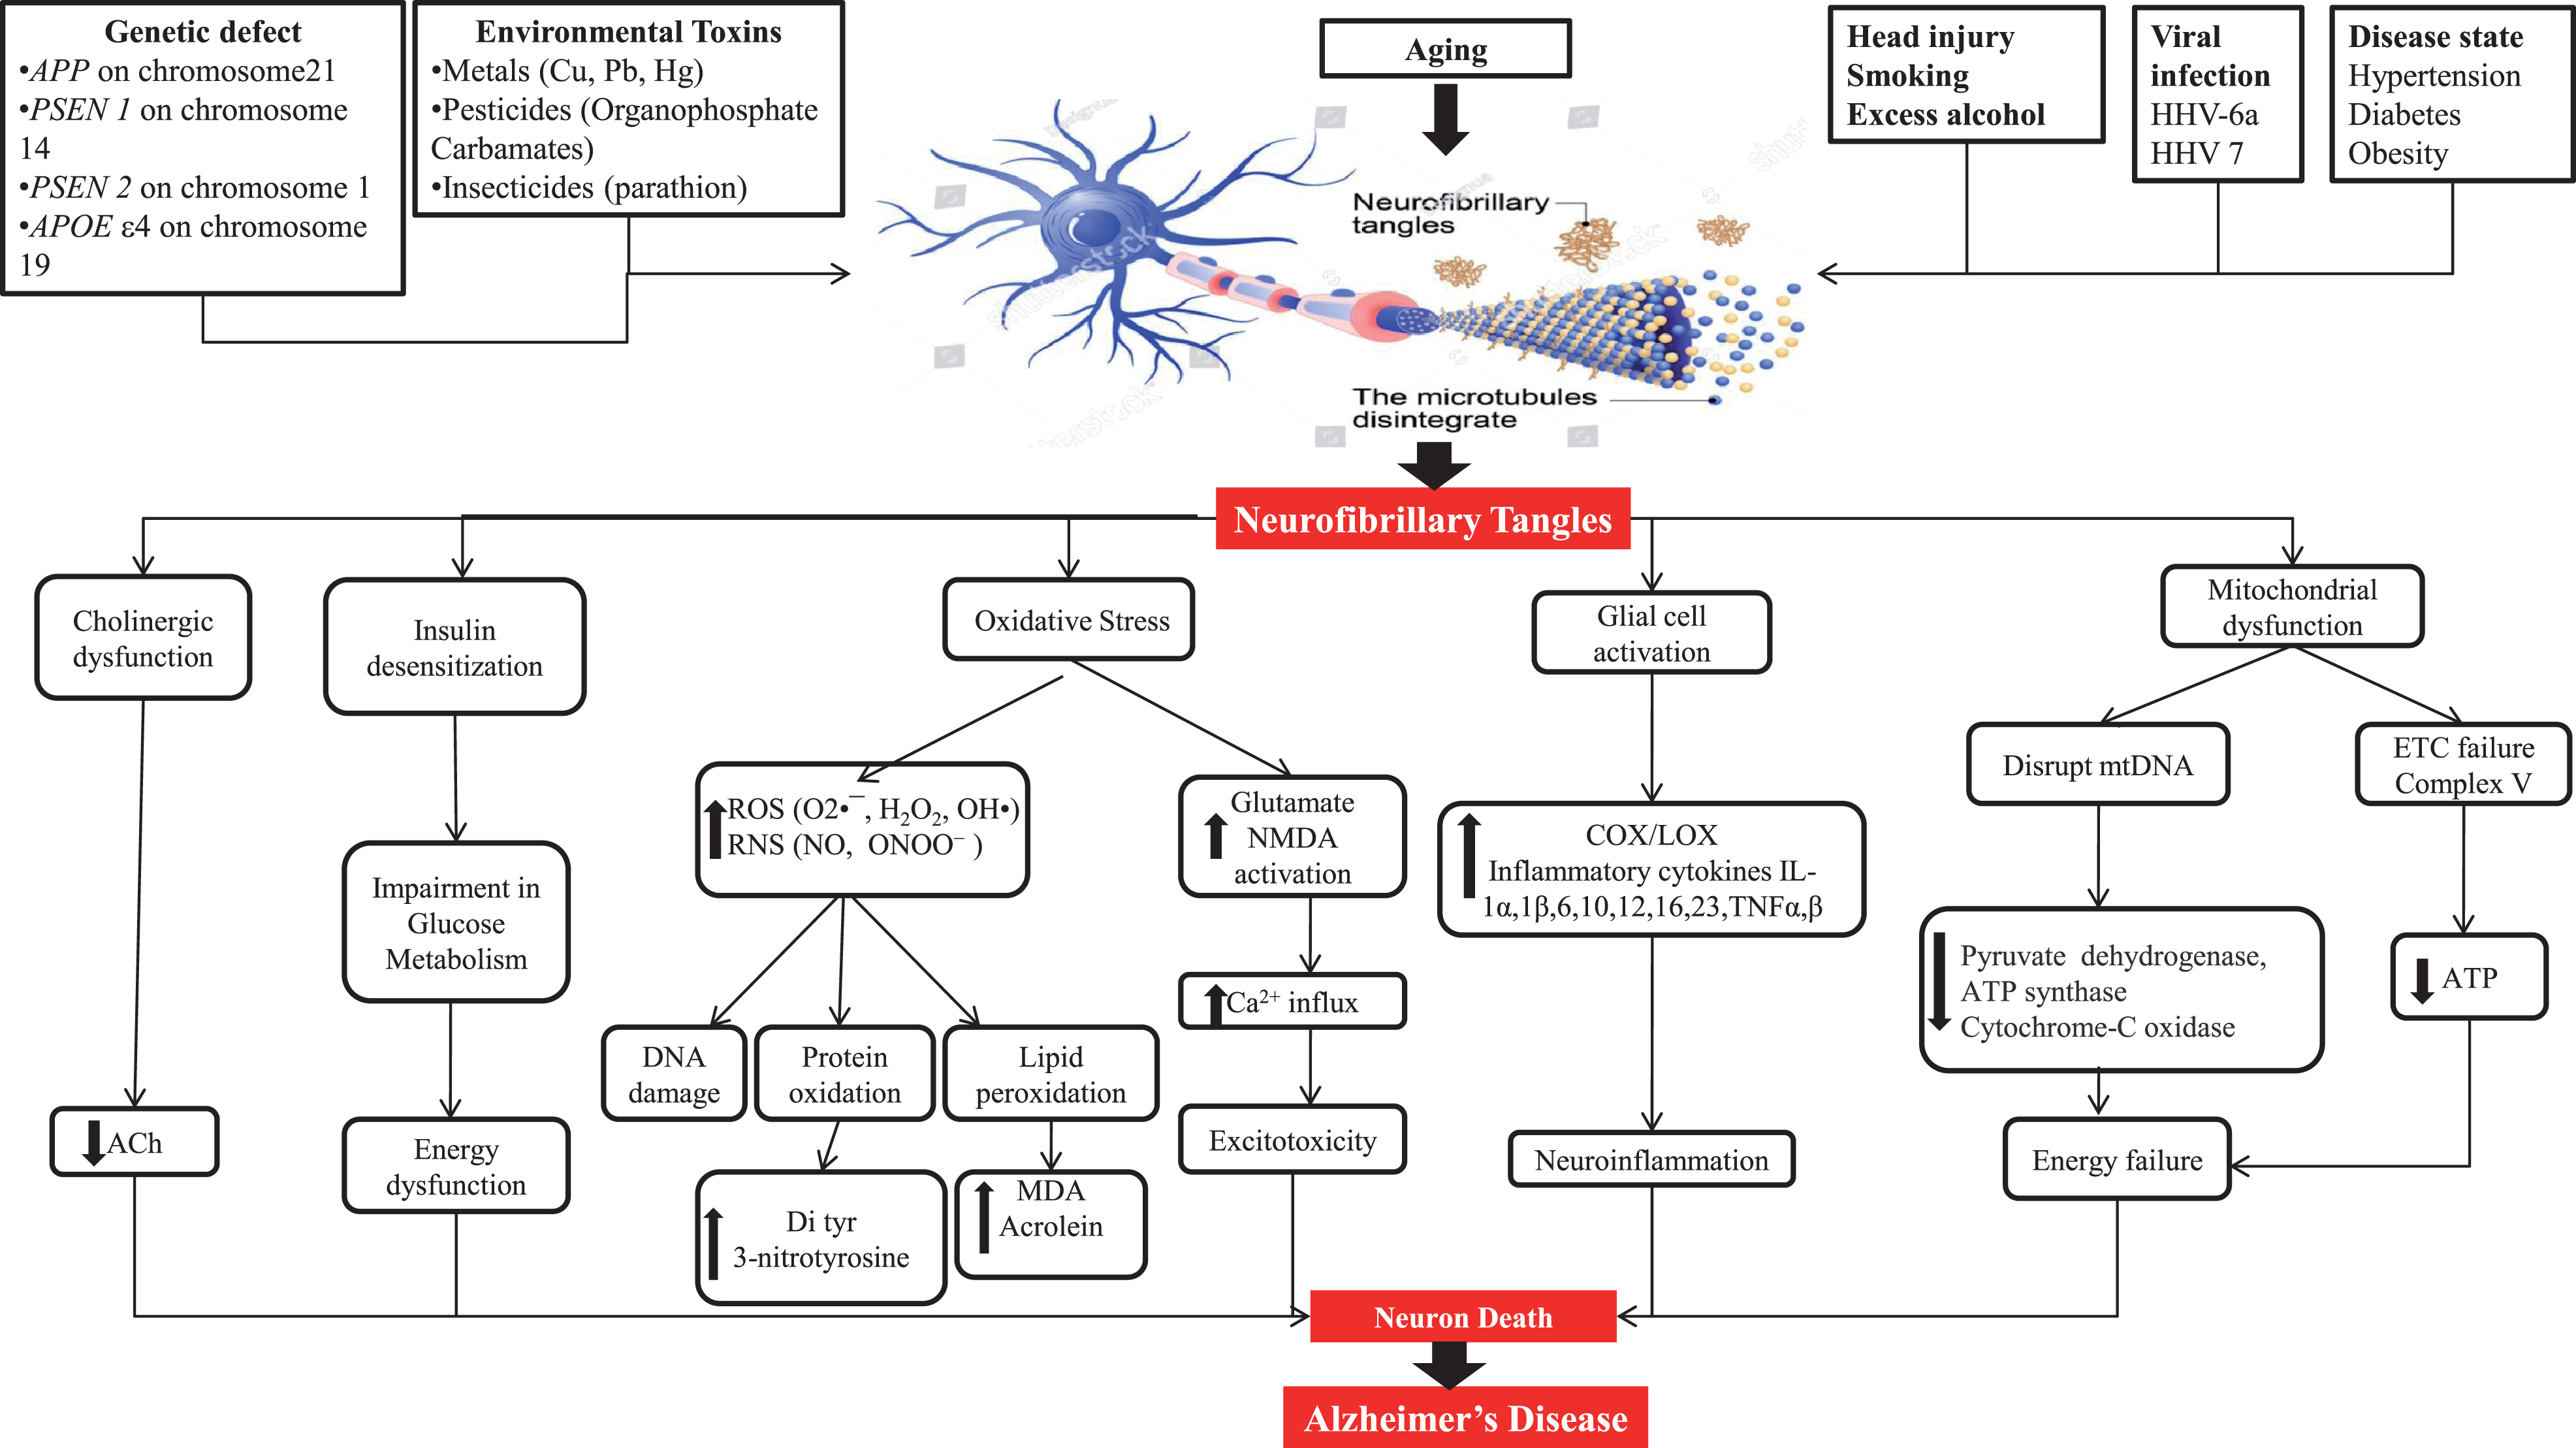 Neuropathological factors engaged to cause Alzheimer’s disease.